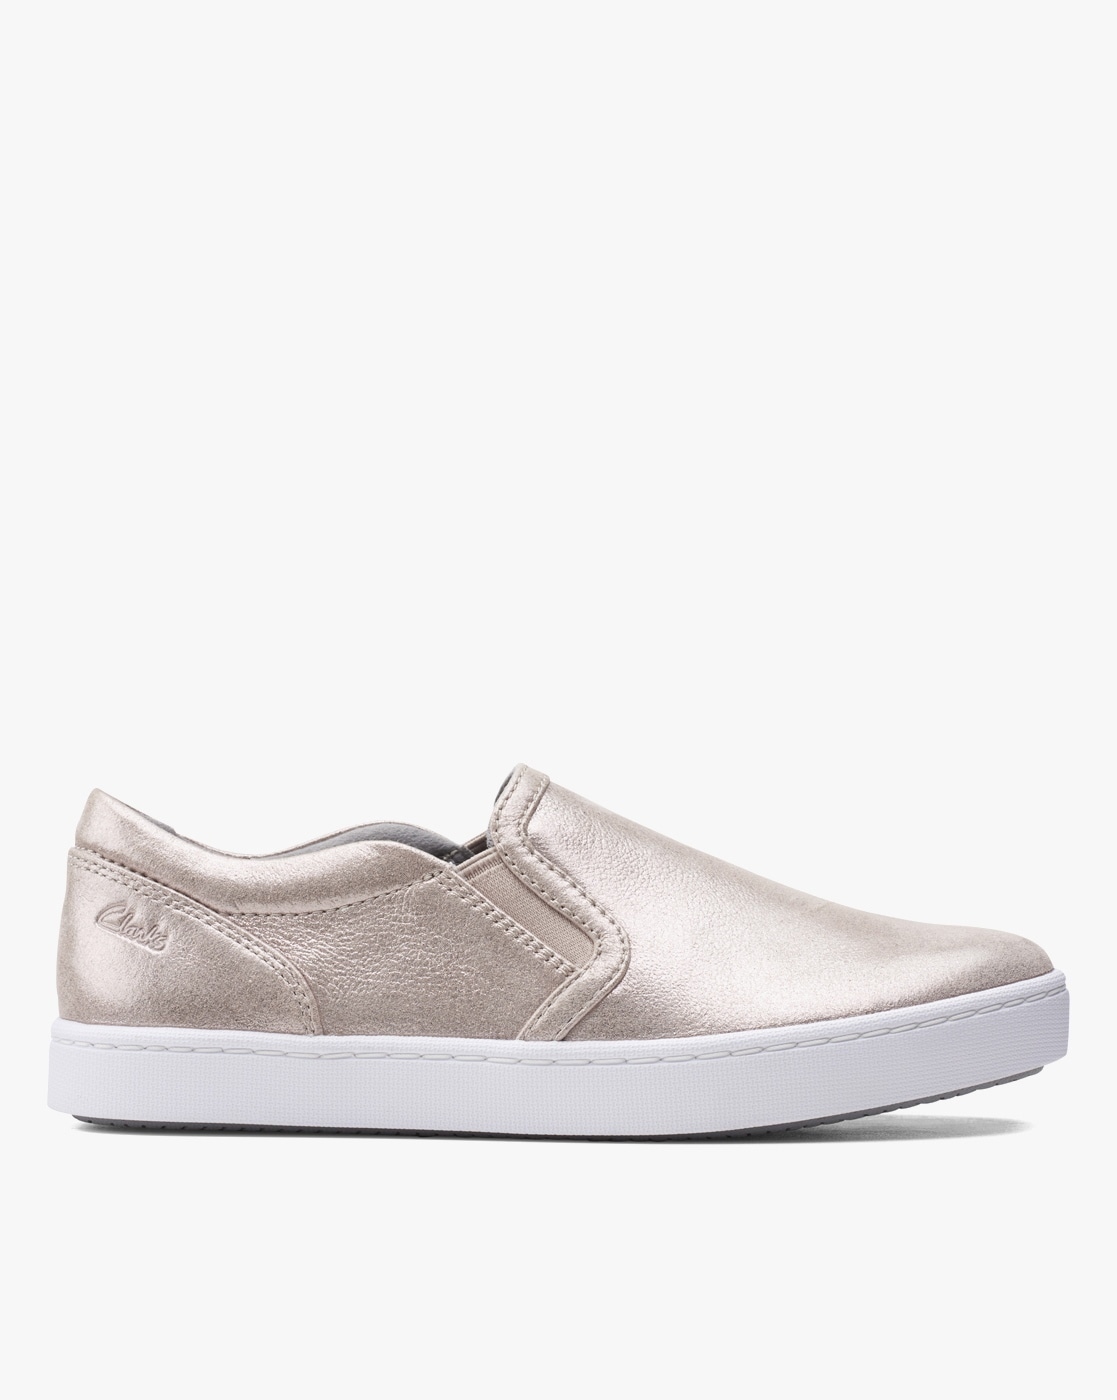 The Bzees Charlie Slip-on Sneakers Are Up to 32% Off